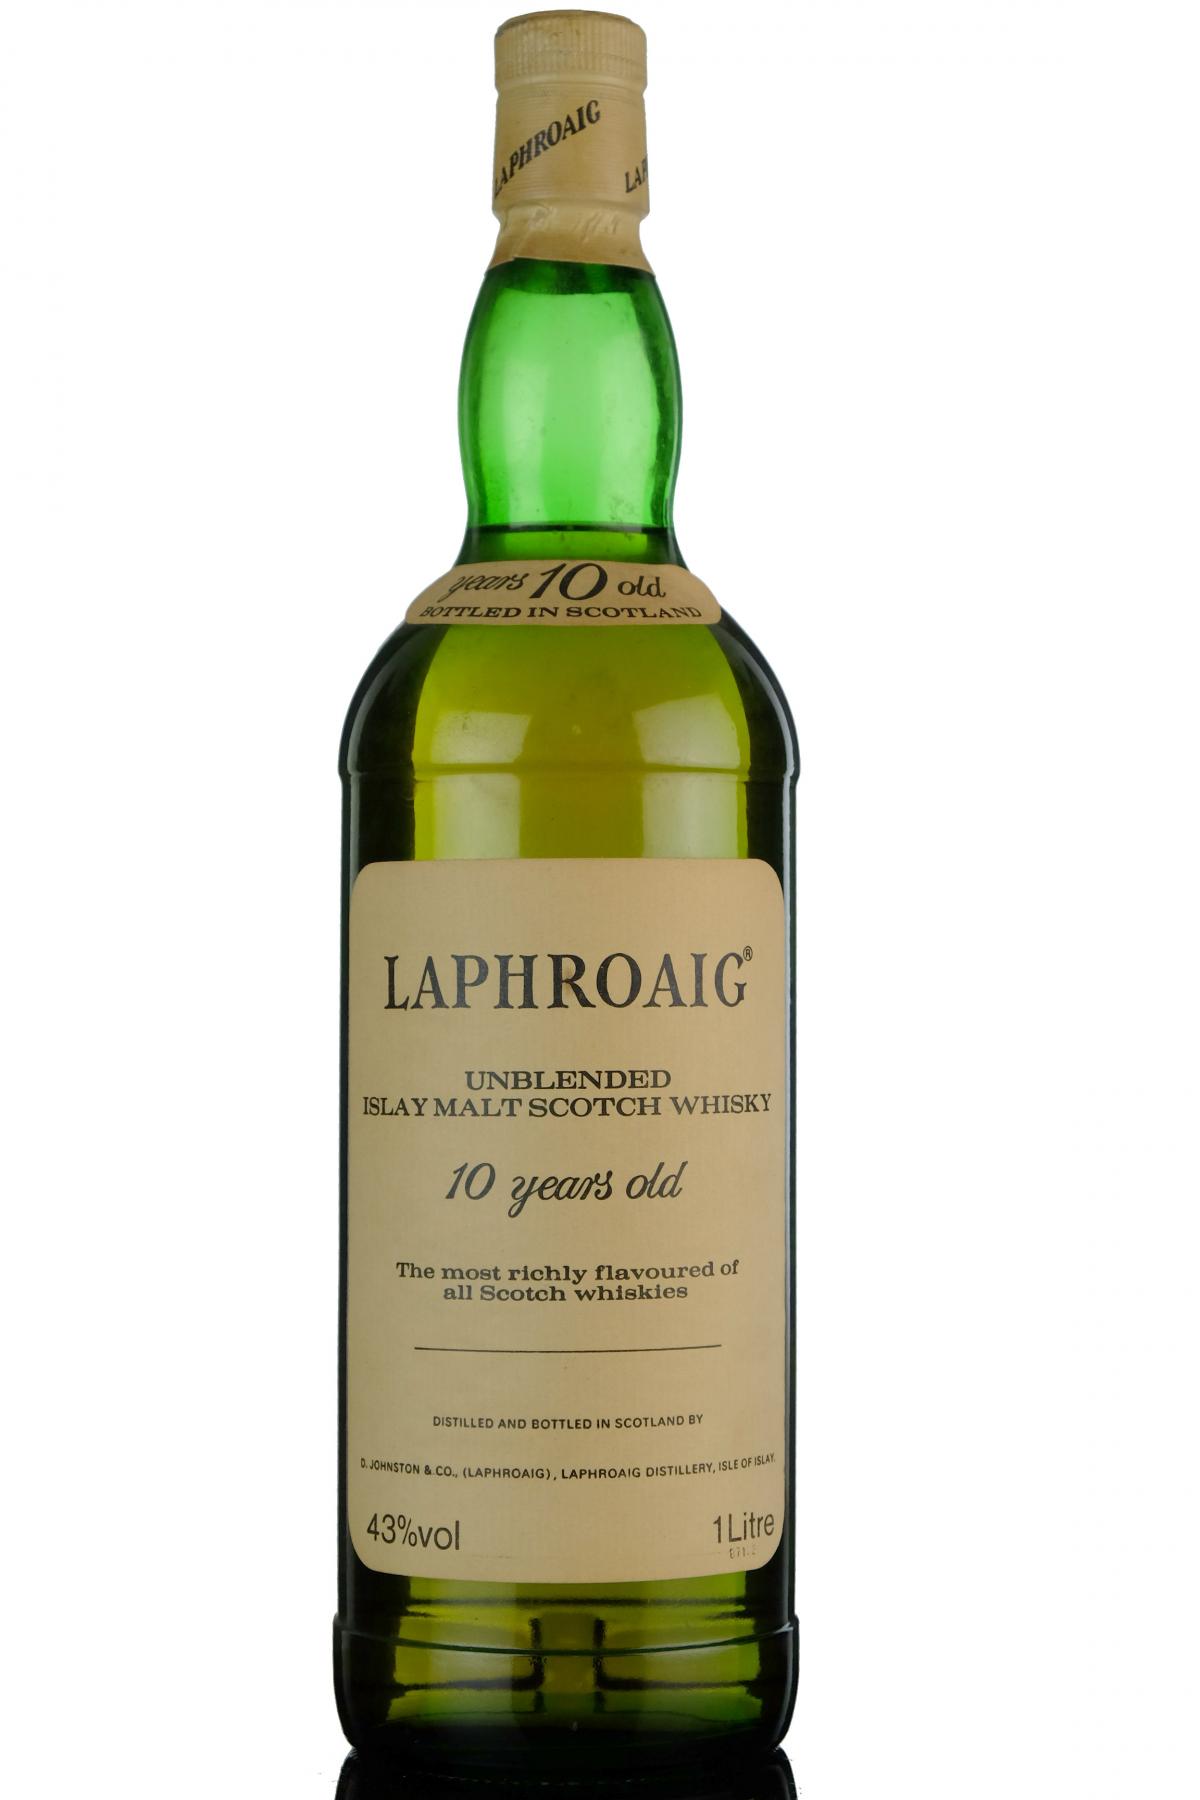 Laphroaig 10 Year Old - Early 1990s - 1 Litre